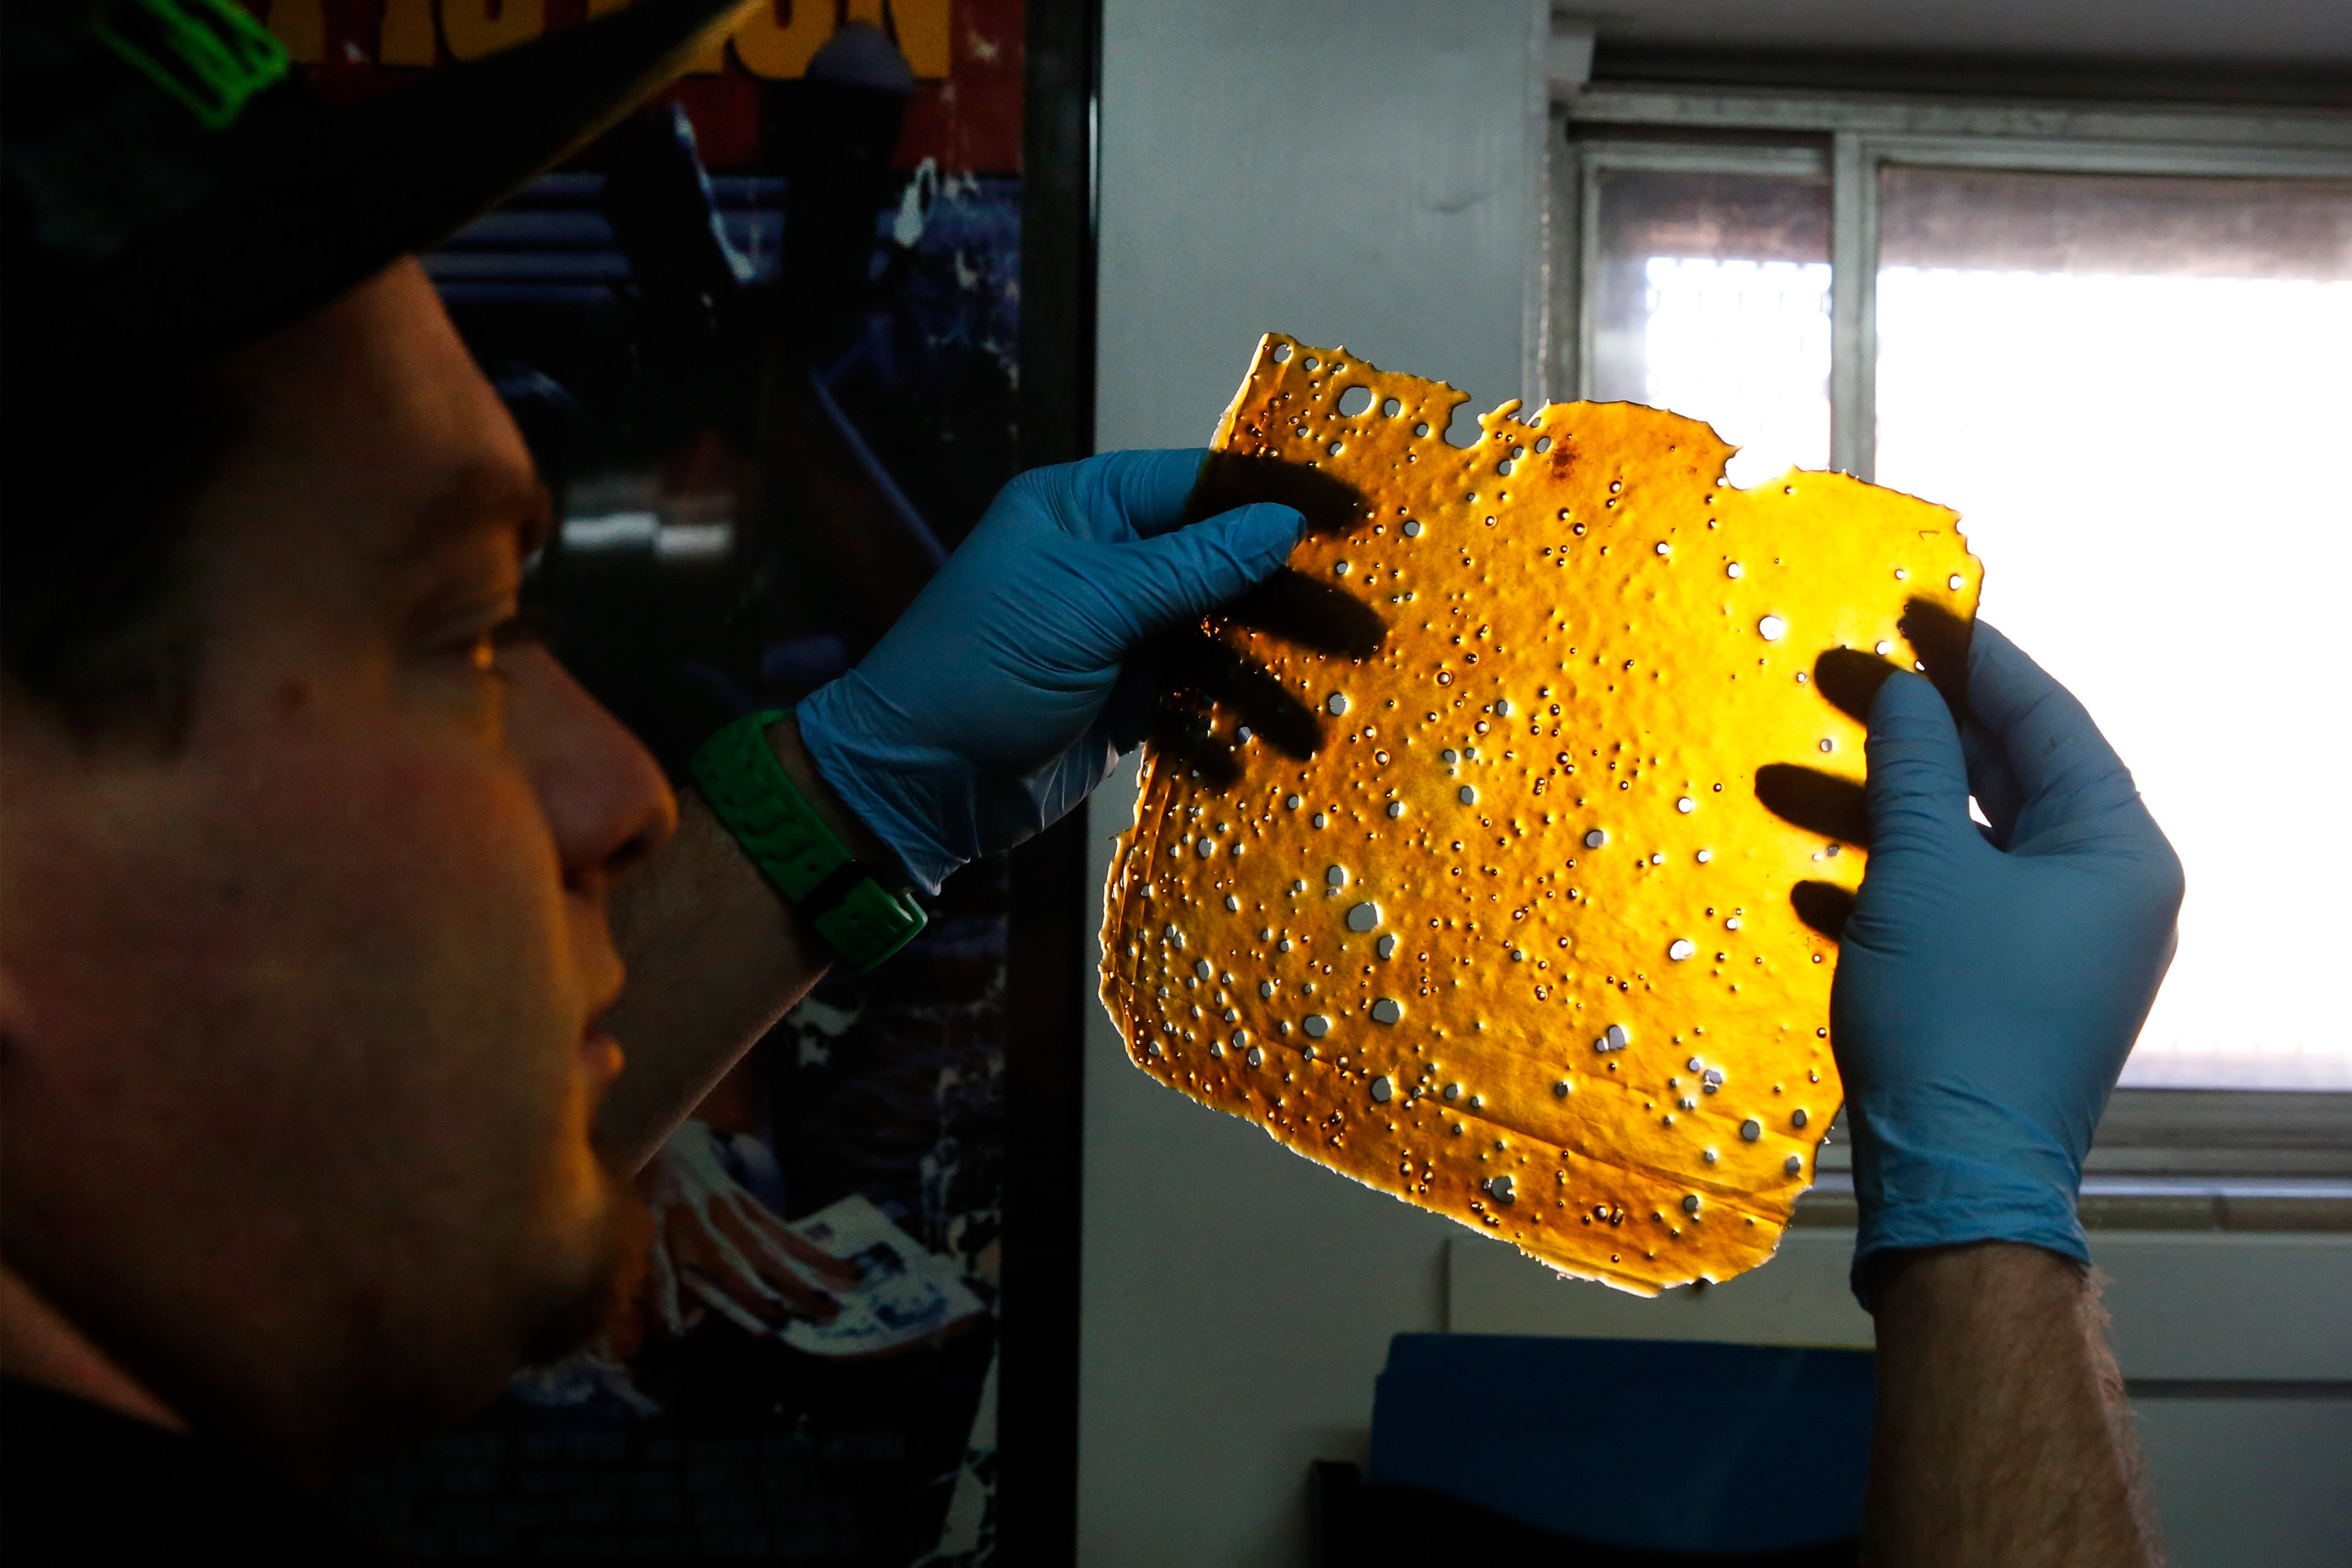 A photo of a man holding an amber sheet of crystallized THC concentrate in gloved hands up to the light.